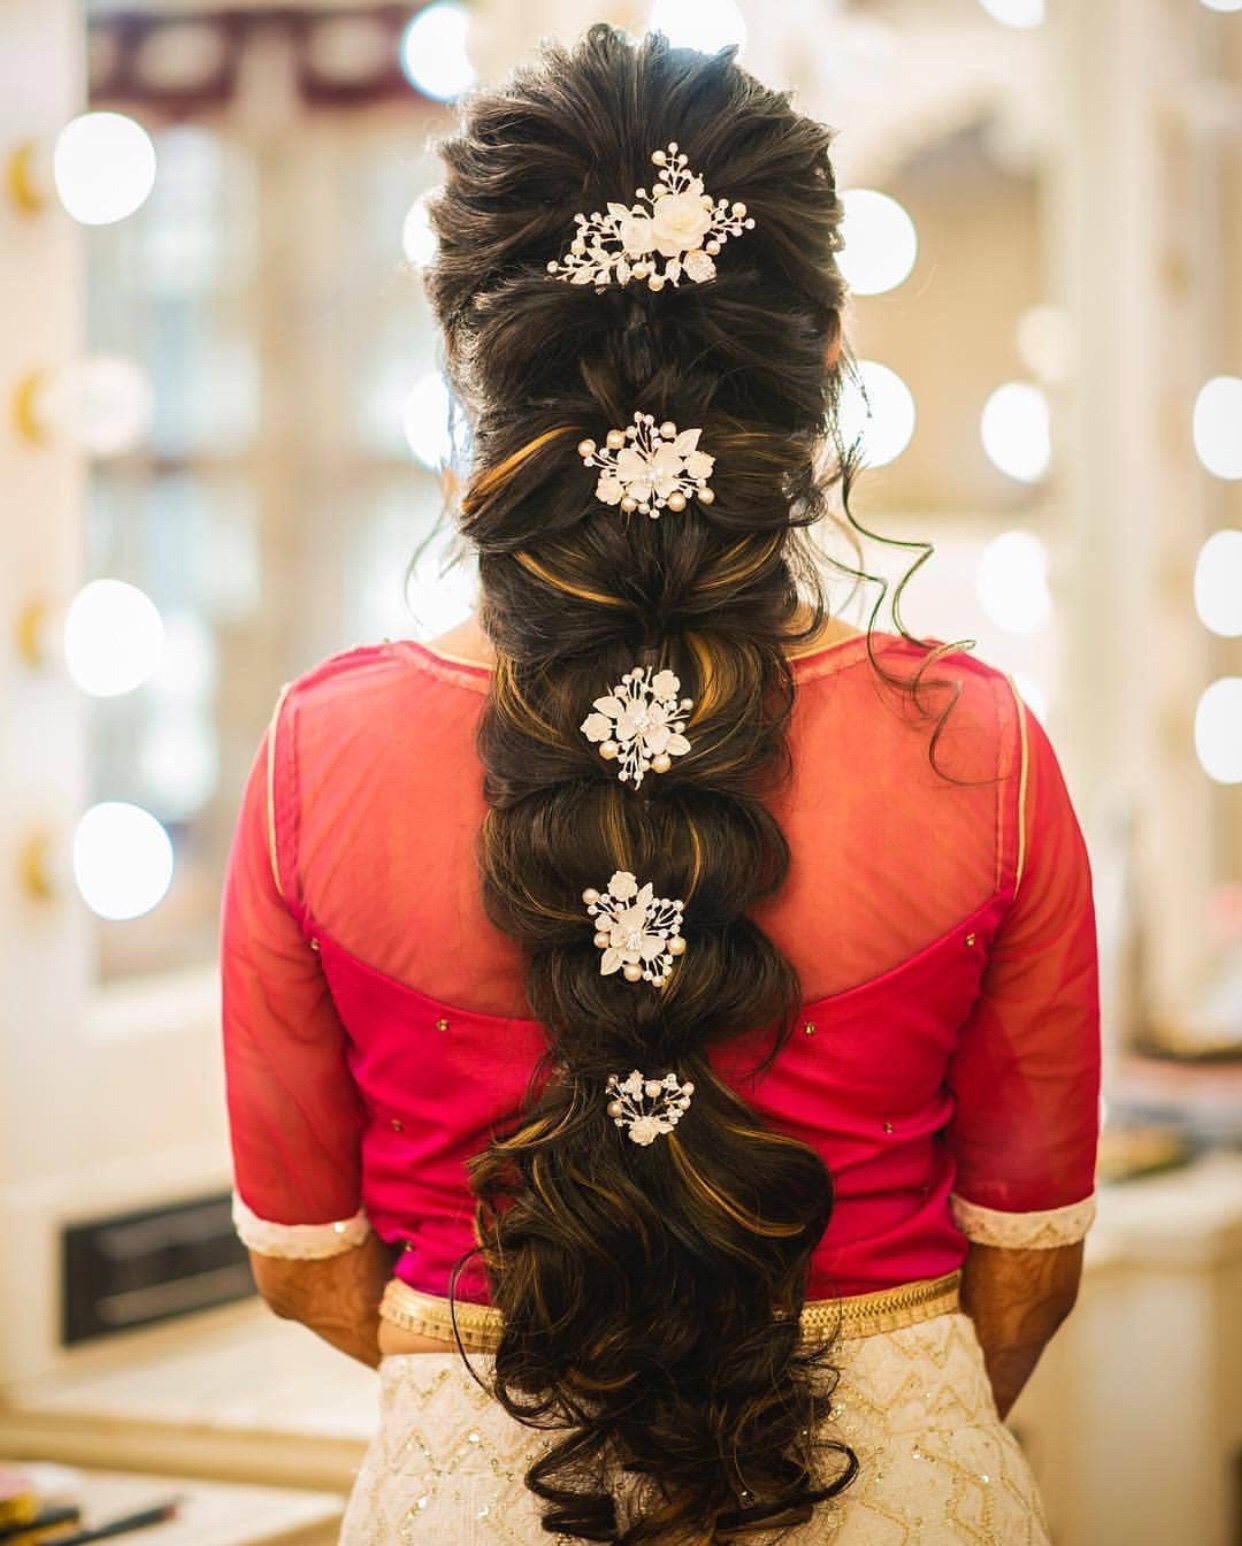 TBG Bridal Store on Twitter South Indian Bridal Hairstyle for Engagement  can be more creative with Braids Hair updos Buns or Curls the options  are totally unlimited Read this article httpstco3foLlx84DQ to